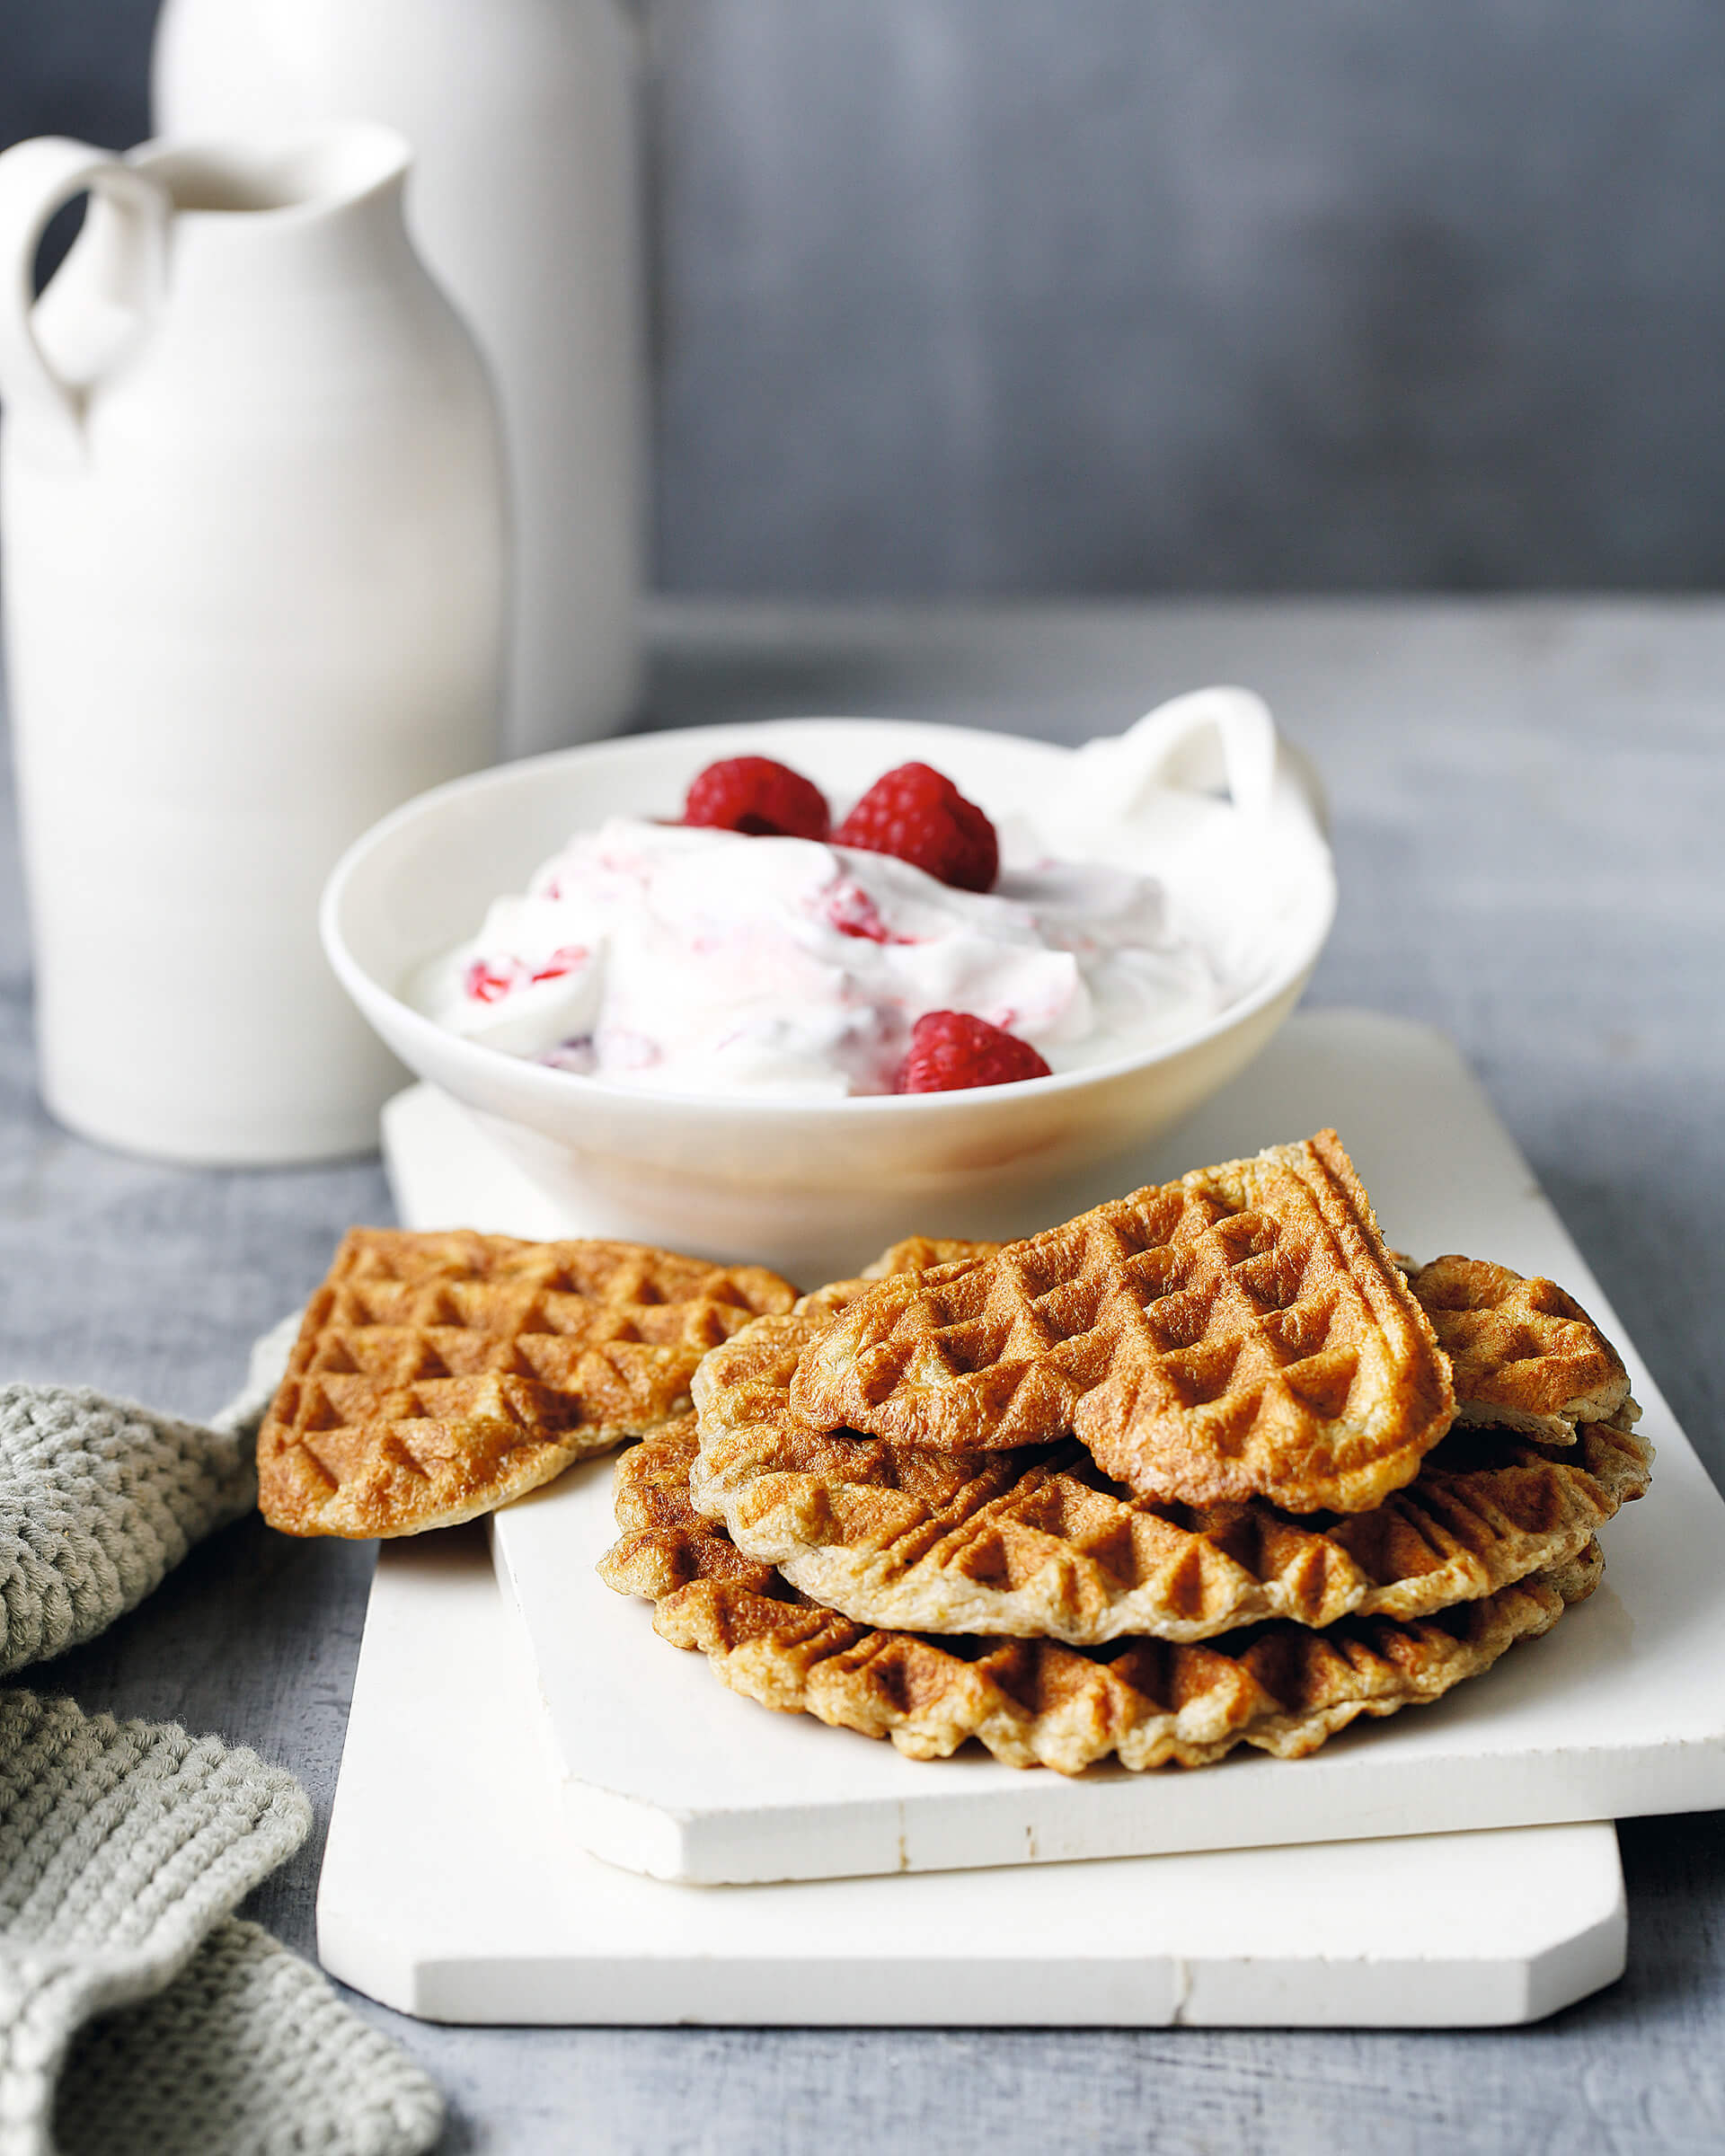 A heart-shaped waffle on top of a stack with yoghurt and fruit in the background.